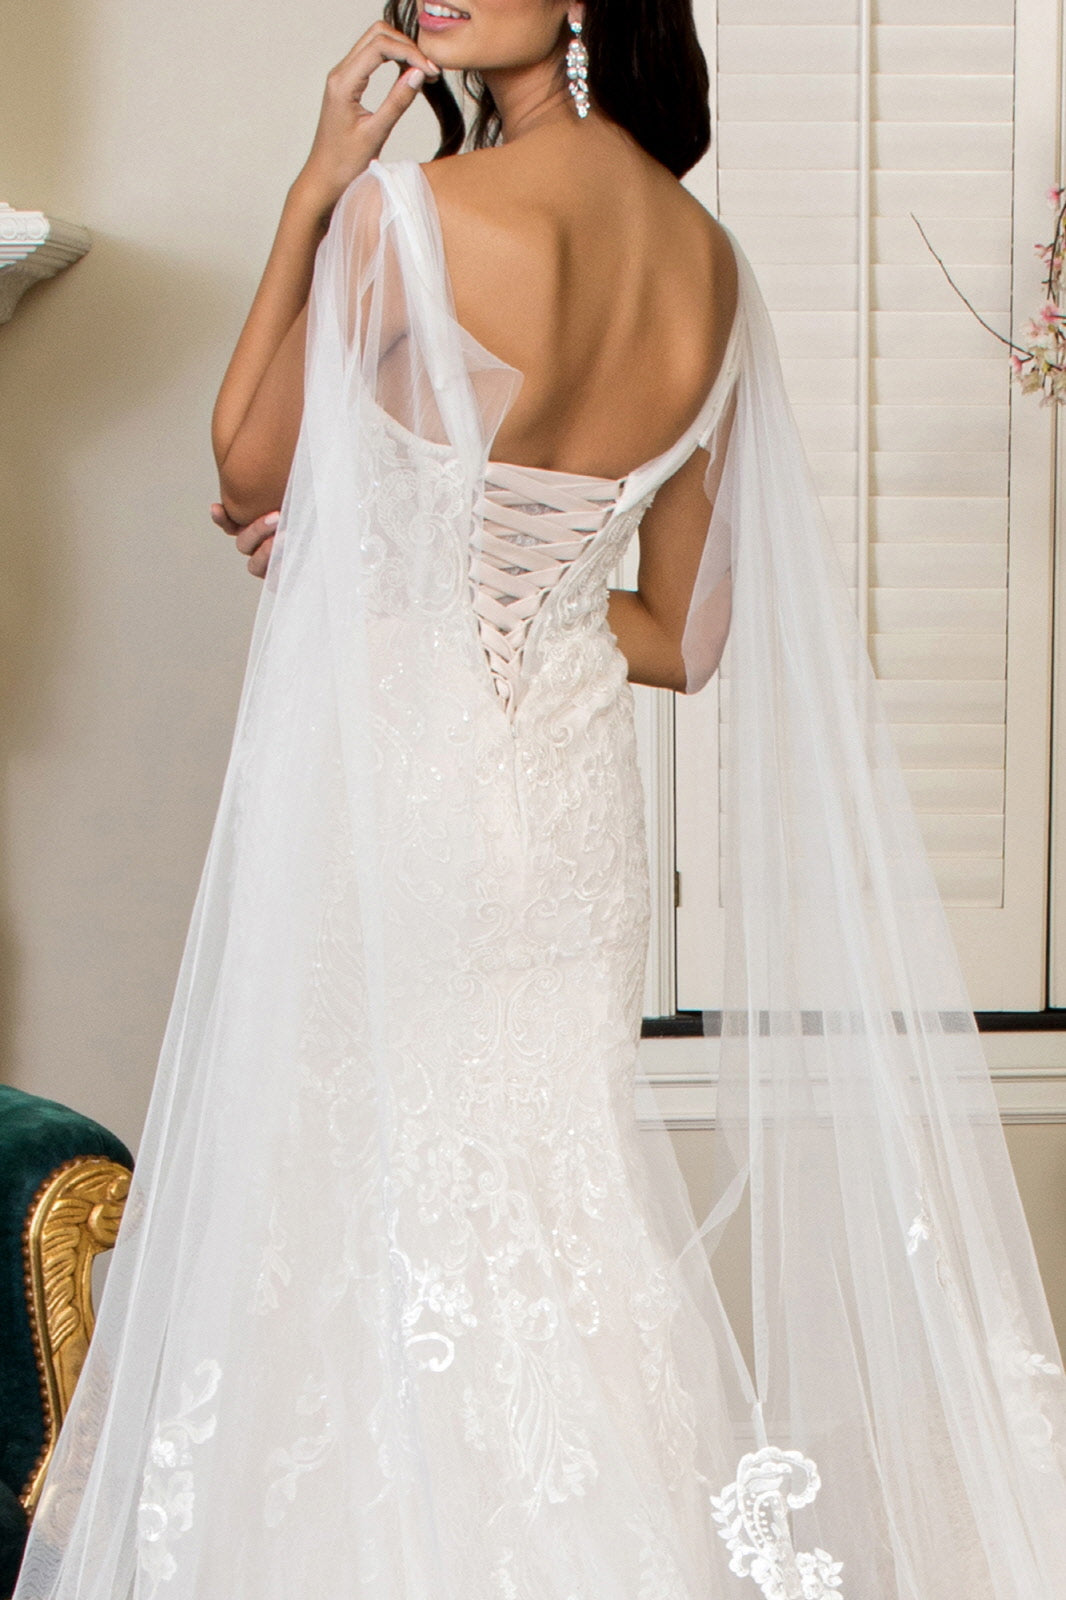 Embroidered V-Neck Mermaid Wedding Gown w/ Detachable Cape - Mask Not Included